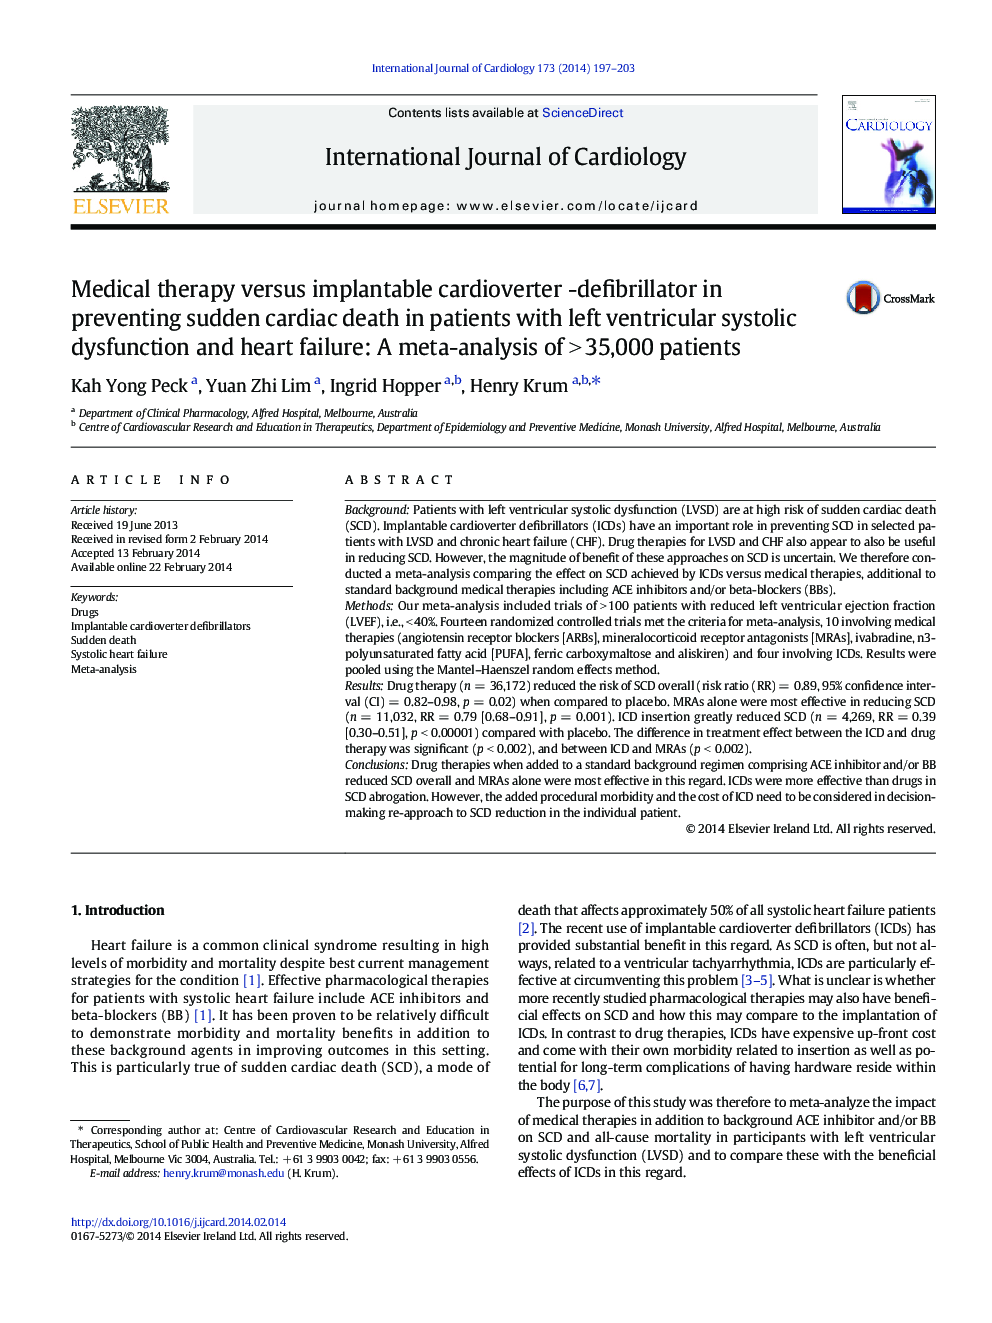 Medical therapy versus implantable cardioverter -defibrillator in preventing sudden cardiac death in patients with left ventricular systolic dysfunction and heart failure: A meta-analysis of > 35,000 patients